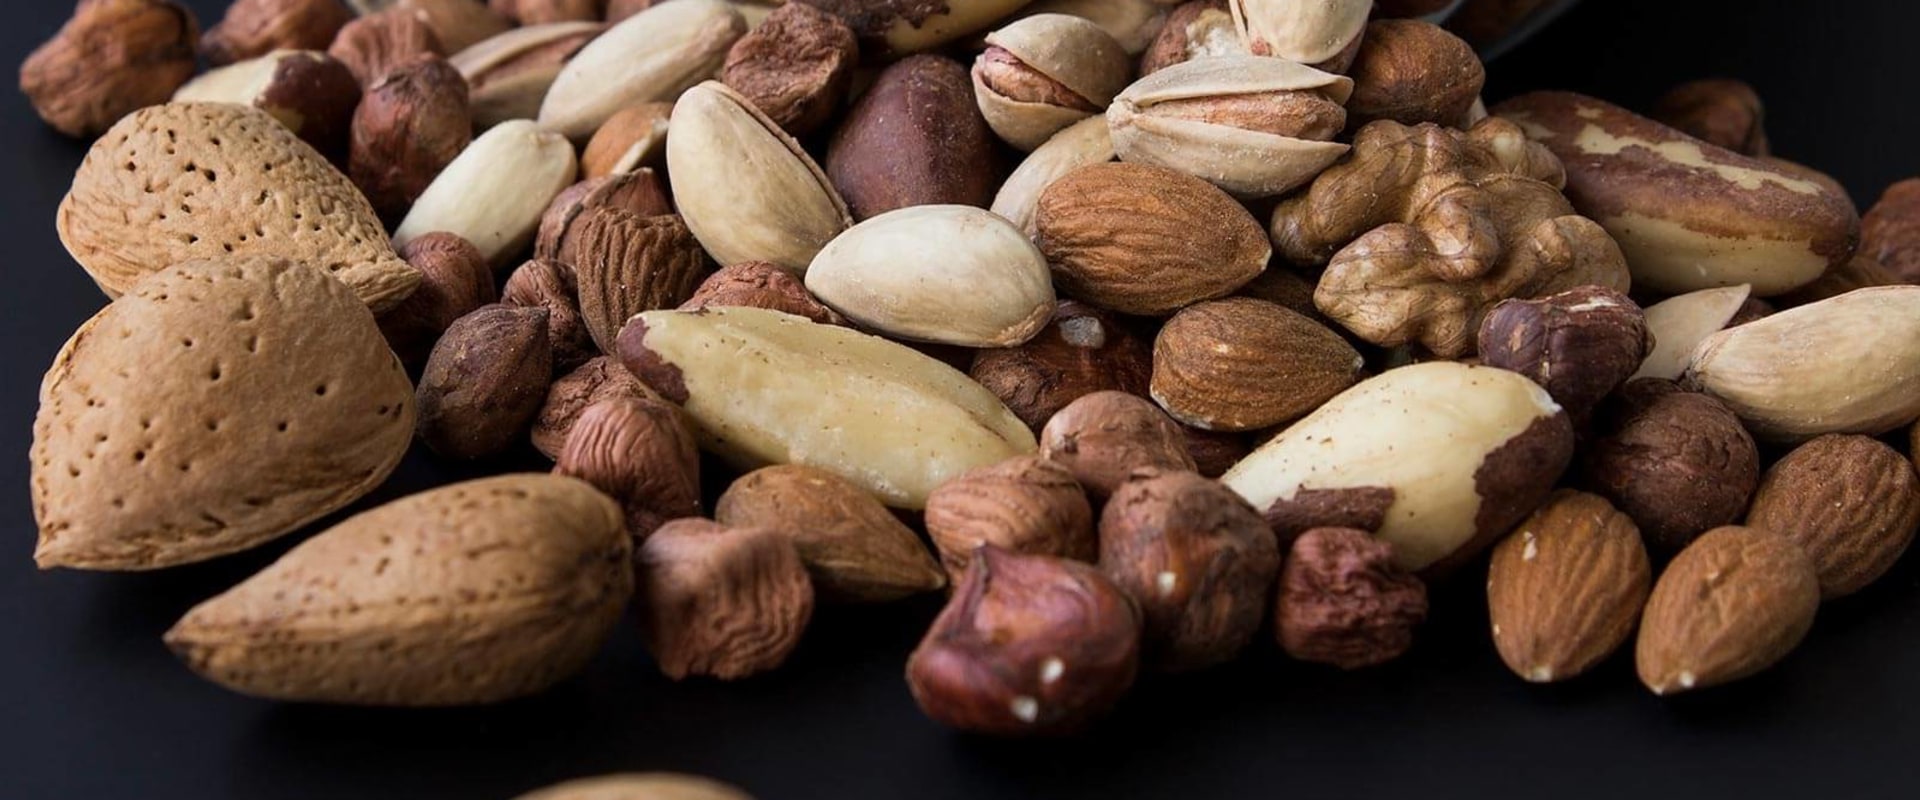 Are nuts good for long term storage?